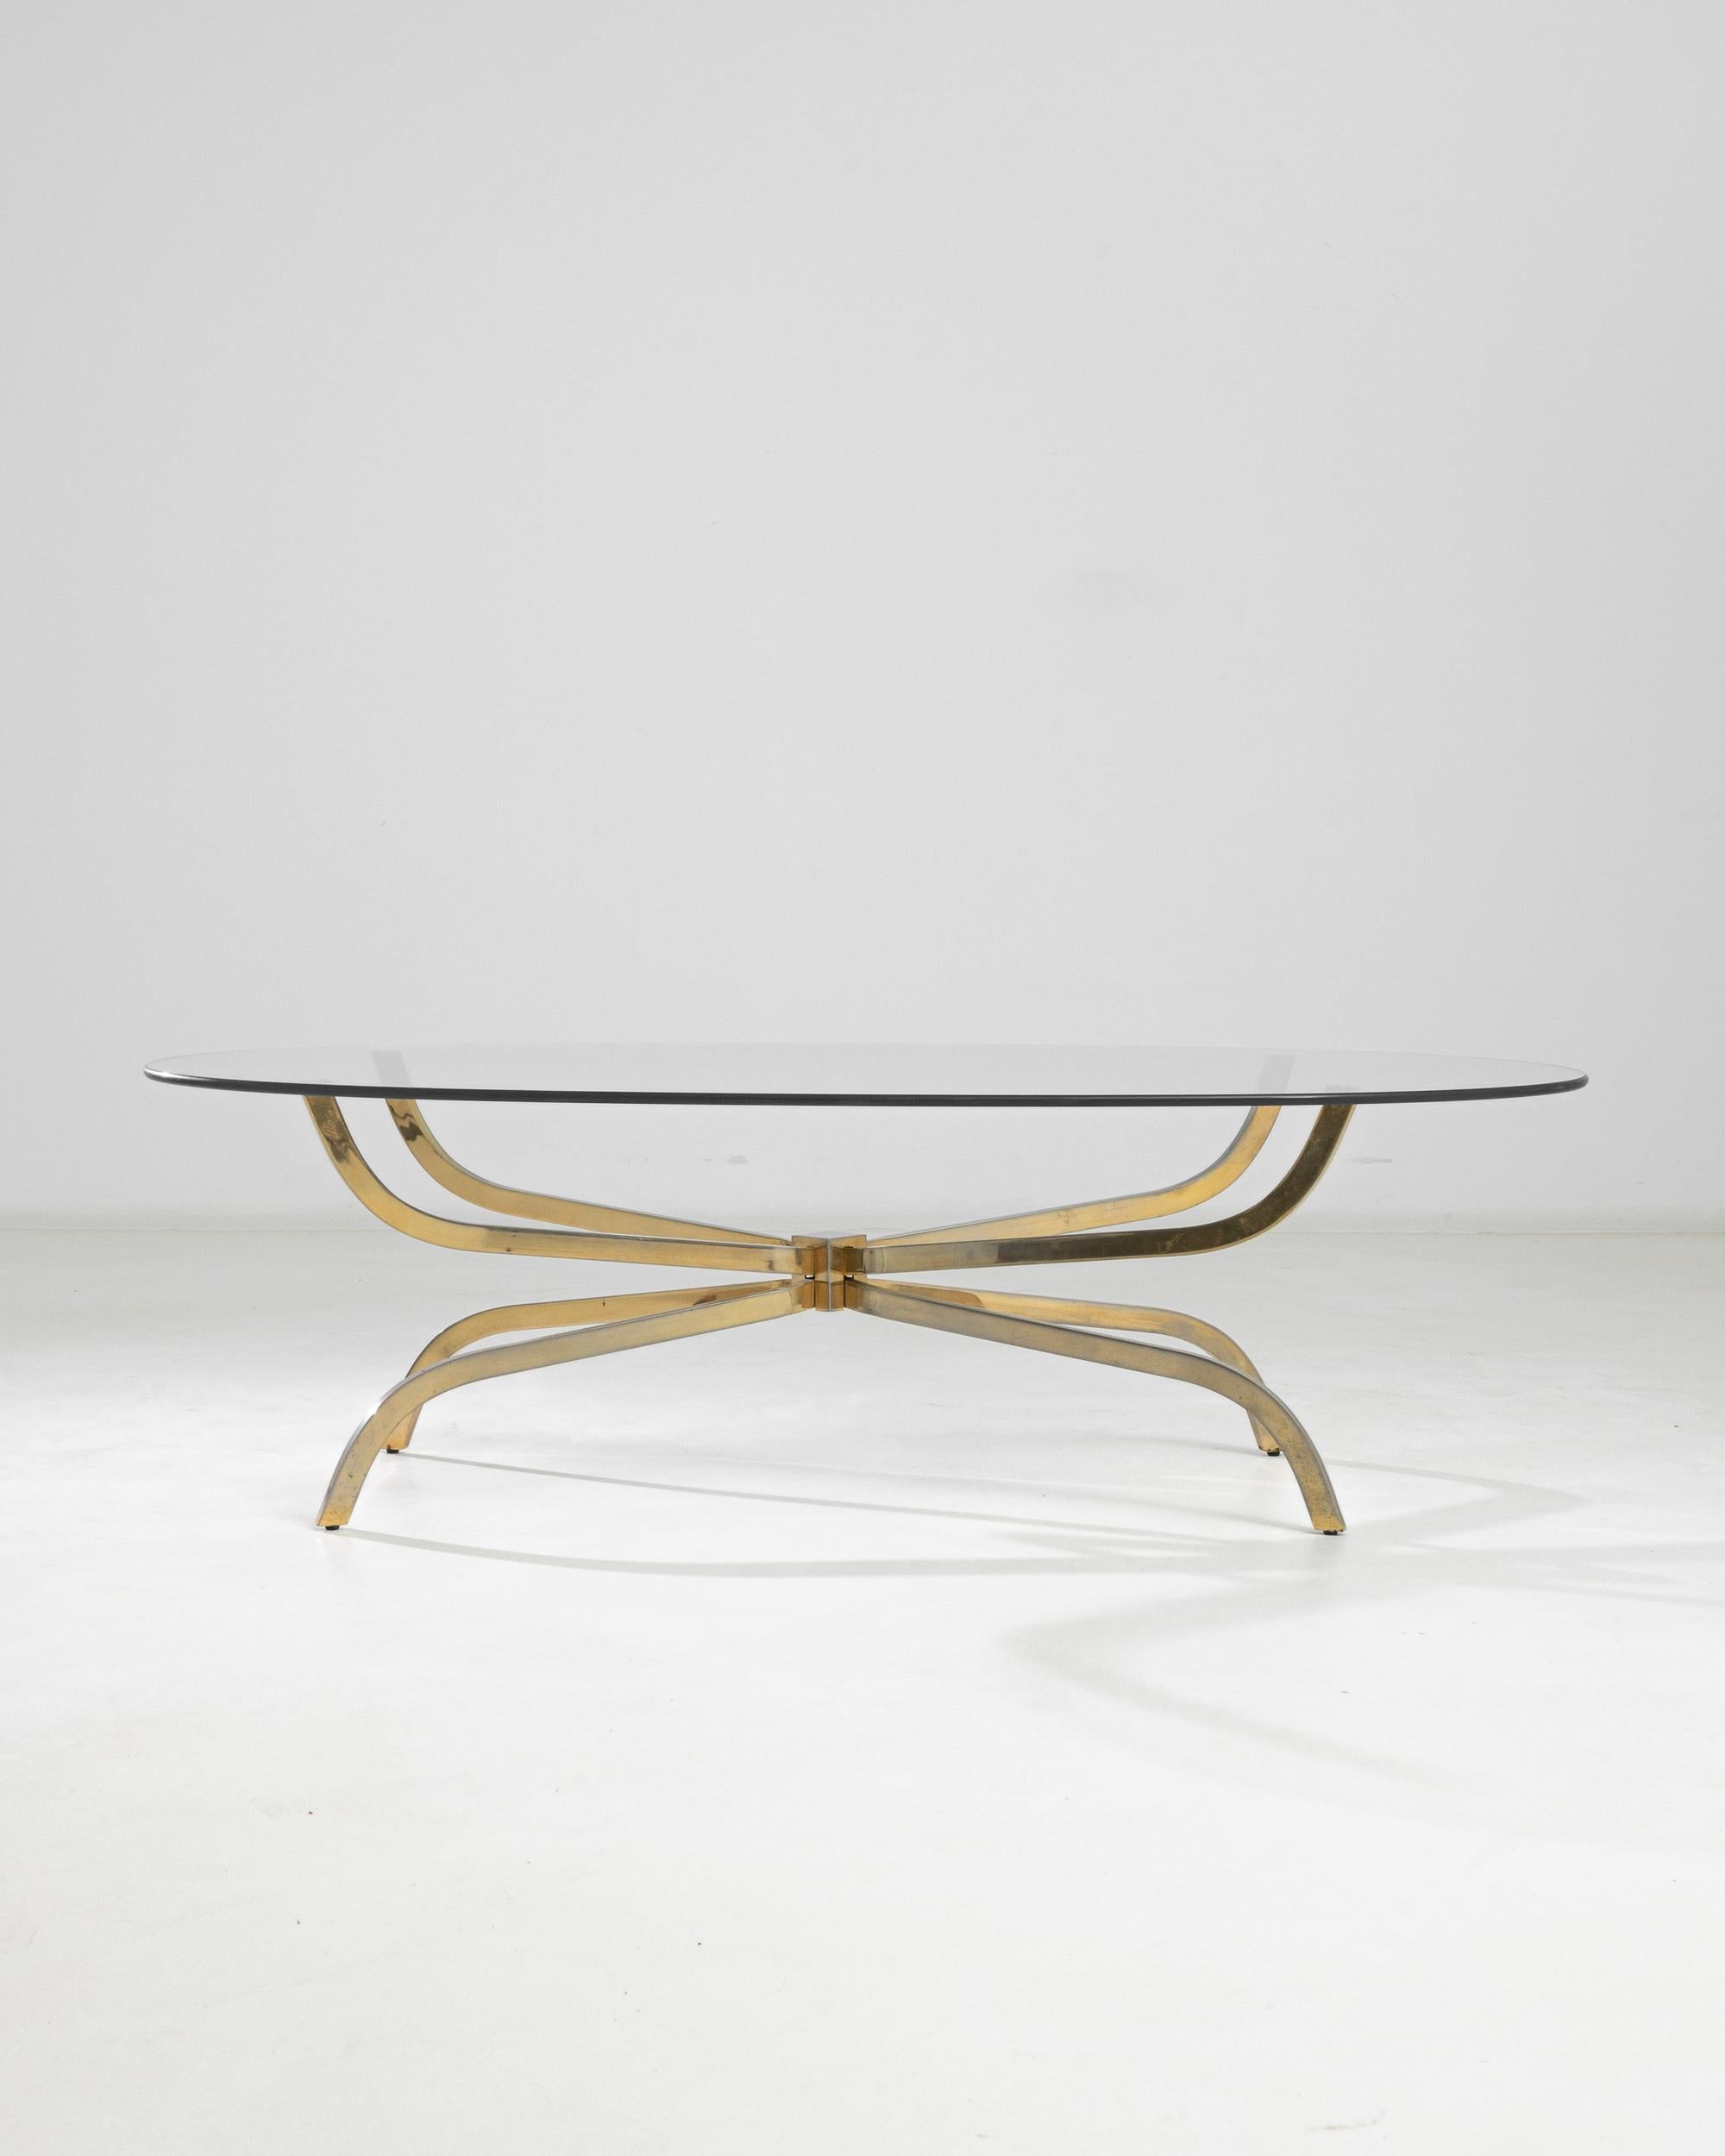 A 20th century brass coffee table produced in Scandinavia. An oval glass top rests on four bass feet, joined in the center like a minimalist floral bouquet. Sturdy yet delicate, the golden brass structure exhibits a light patina and the geometric